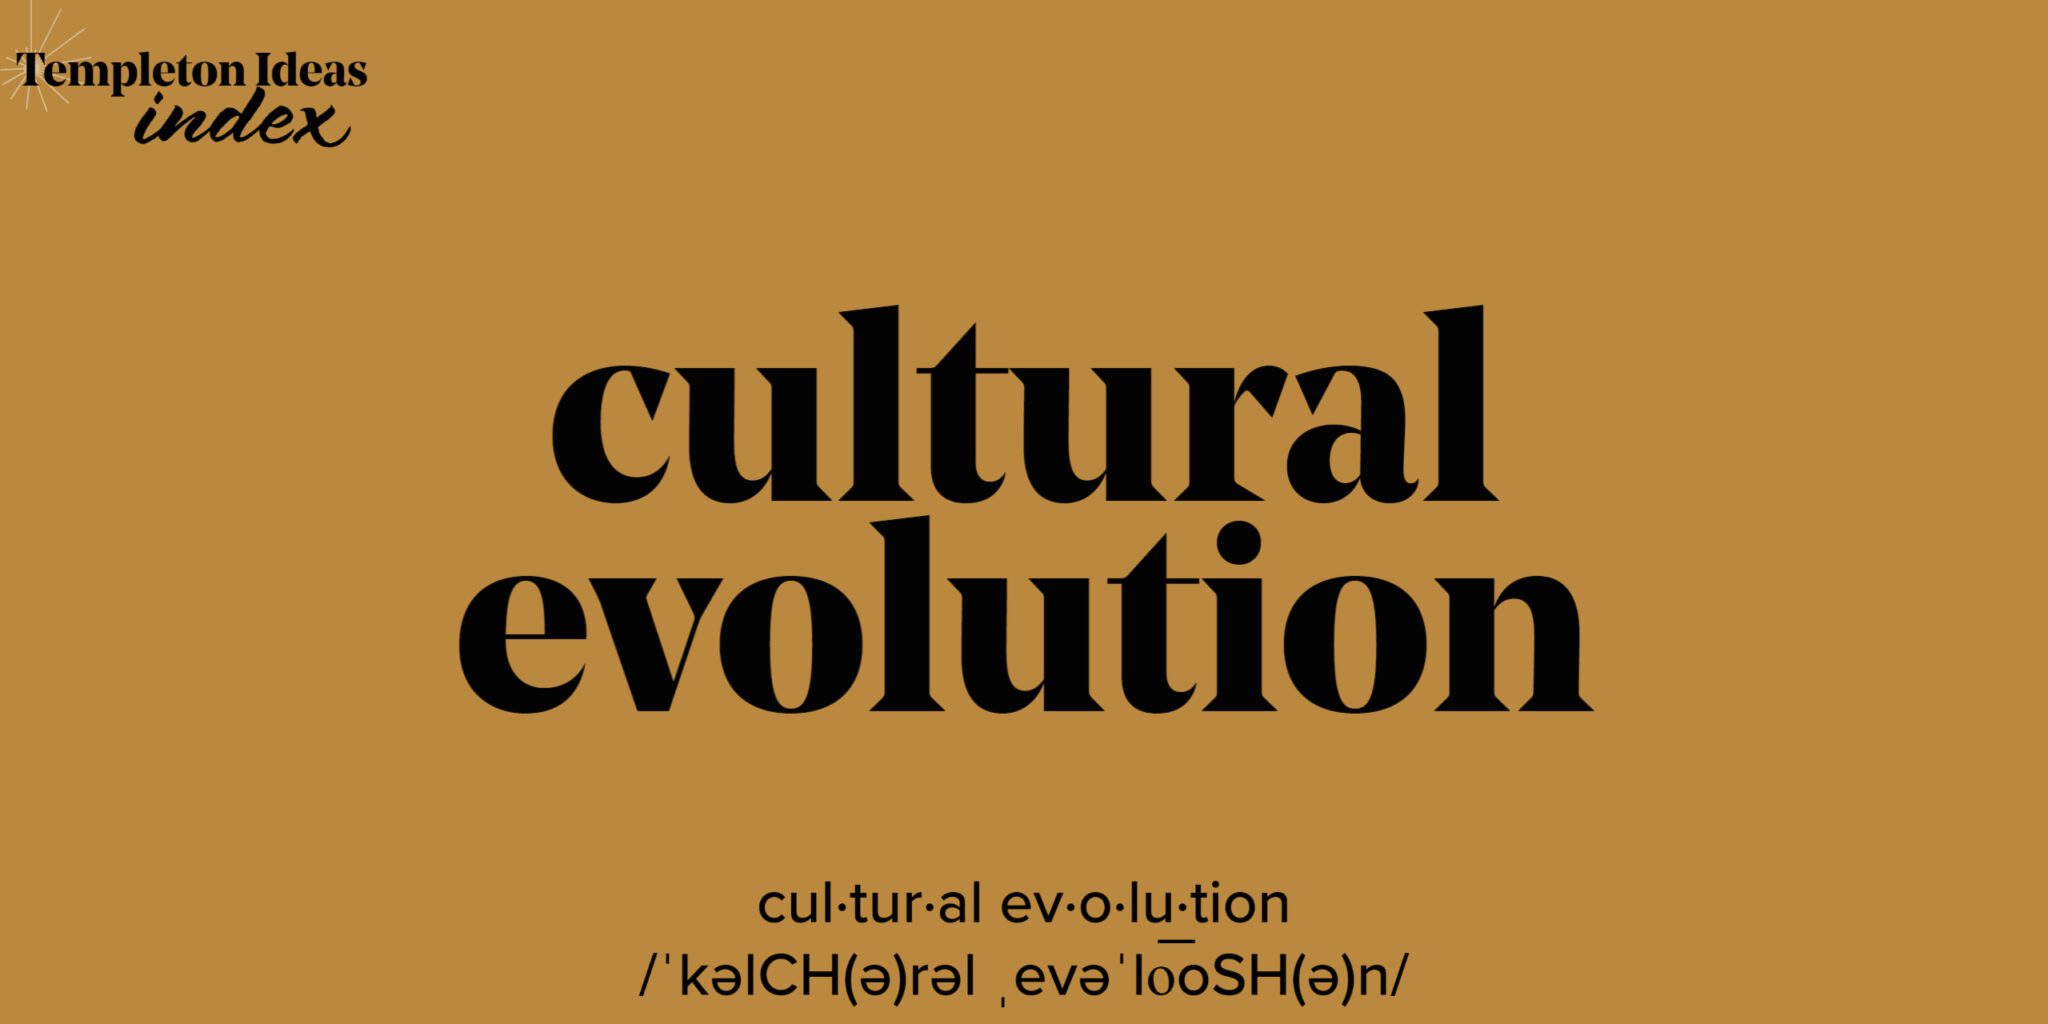 What Is Cultural Evolution?